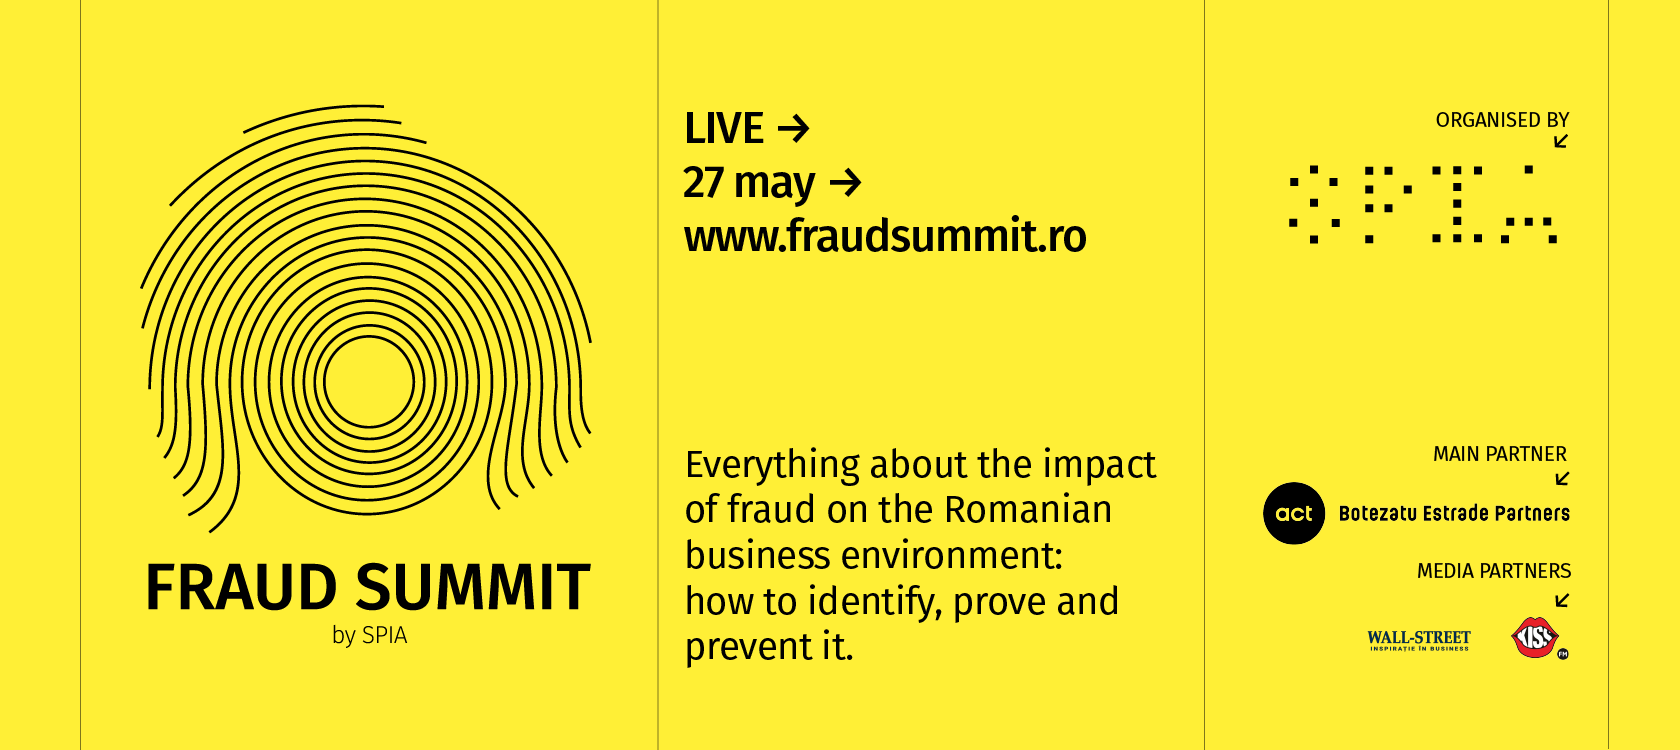 Banner image about FRAUD SUMMIT, an event taking place on 27 May 2021